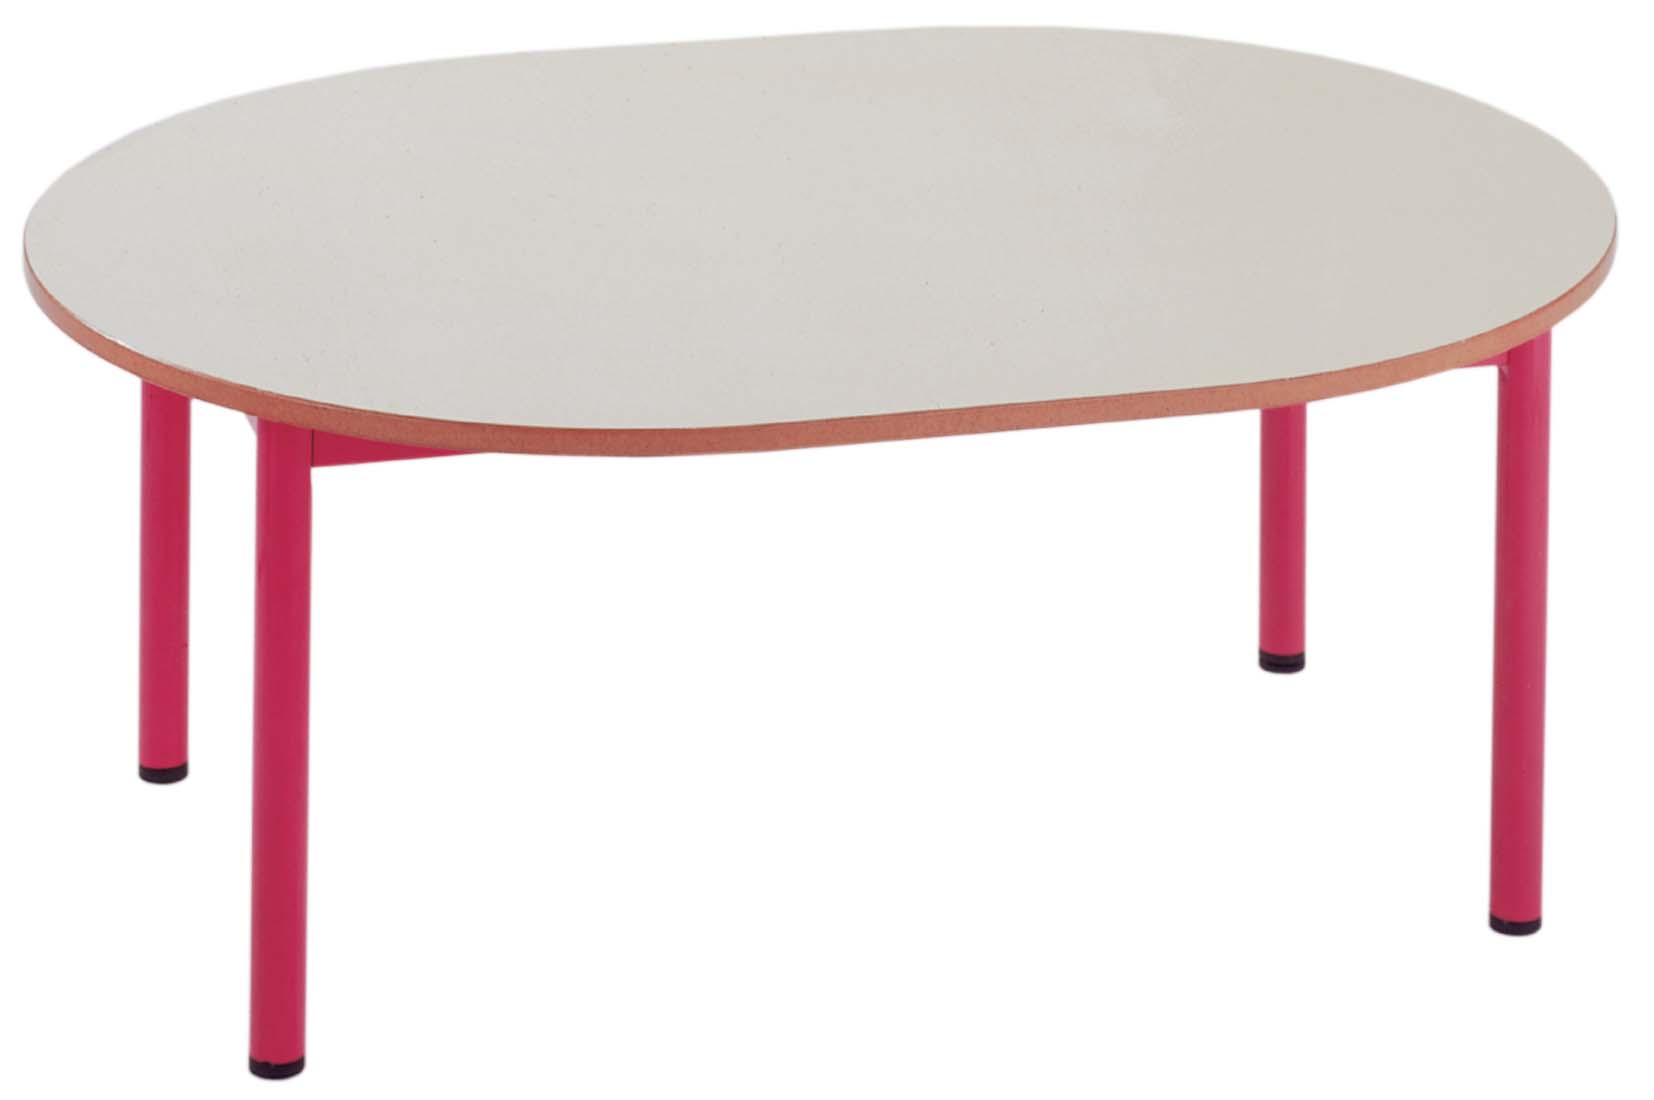 Table maternelle fixe Ovale - photo 1